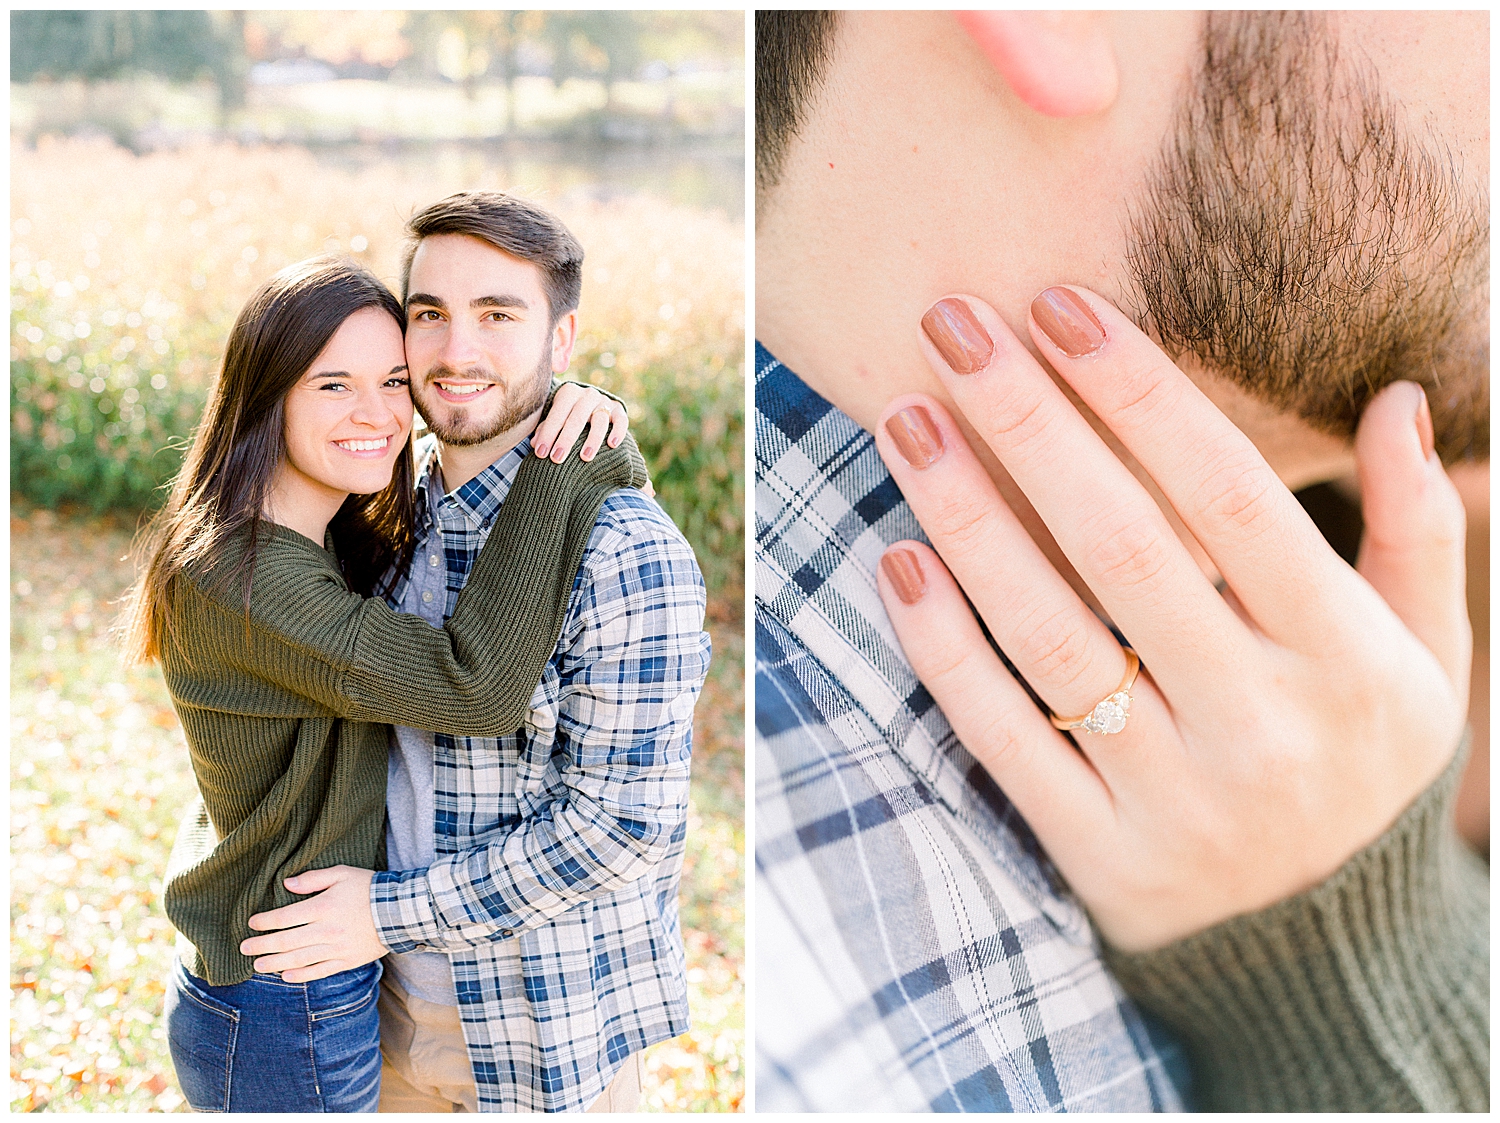 Columbus_Goodale_Park_German_Village_Fall_Engagement_Coffee_Kate_Mannella_Photography